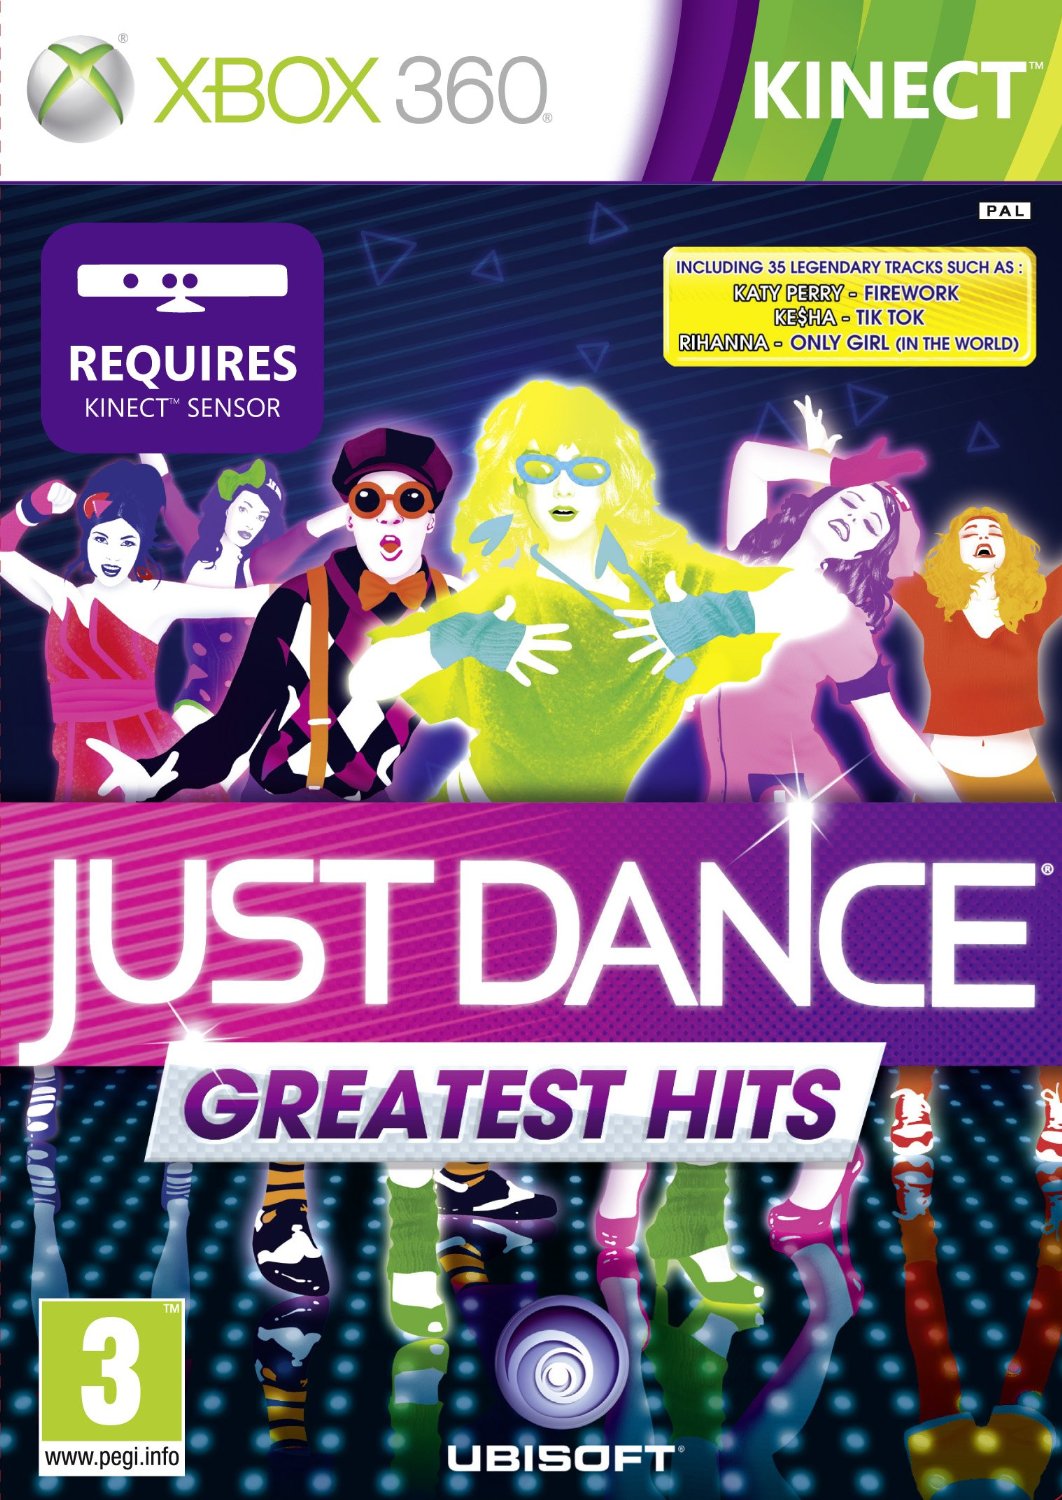 Just Dance - Greatest Hits Xbox 360